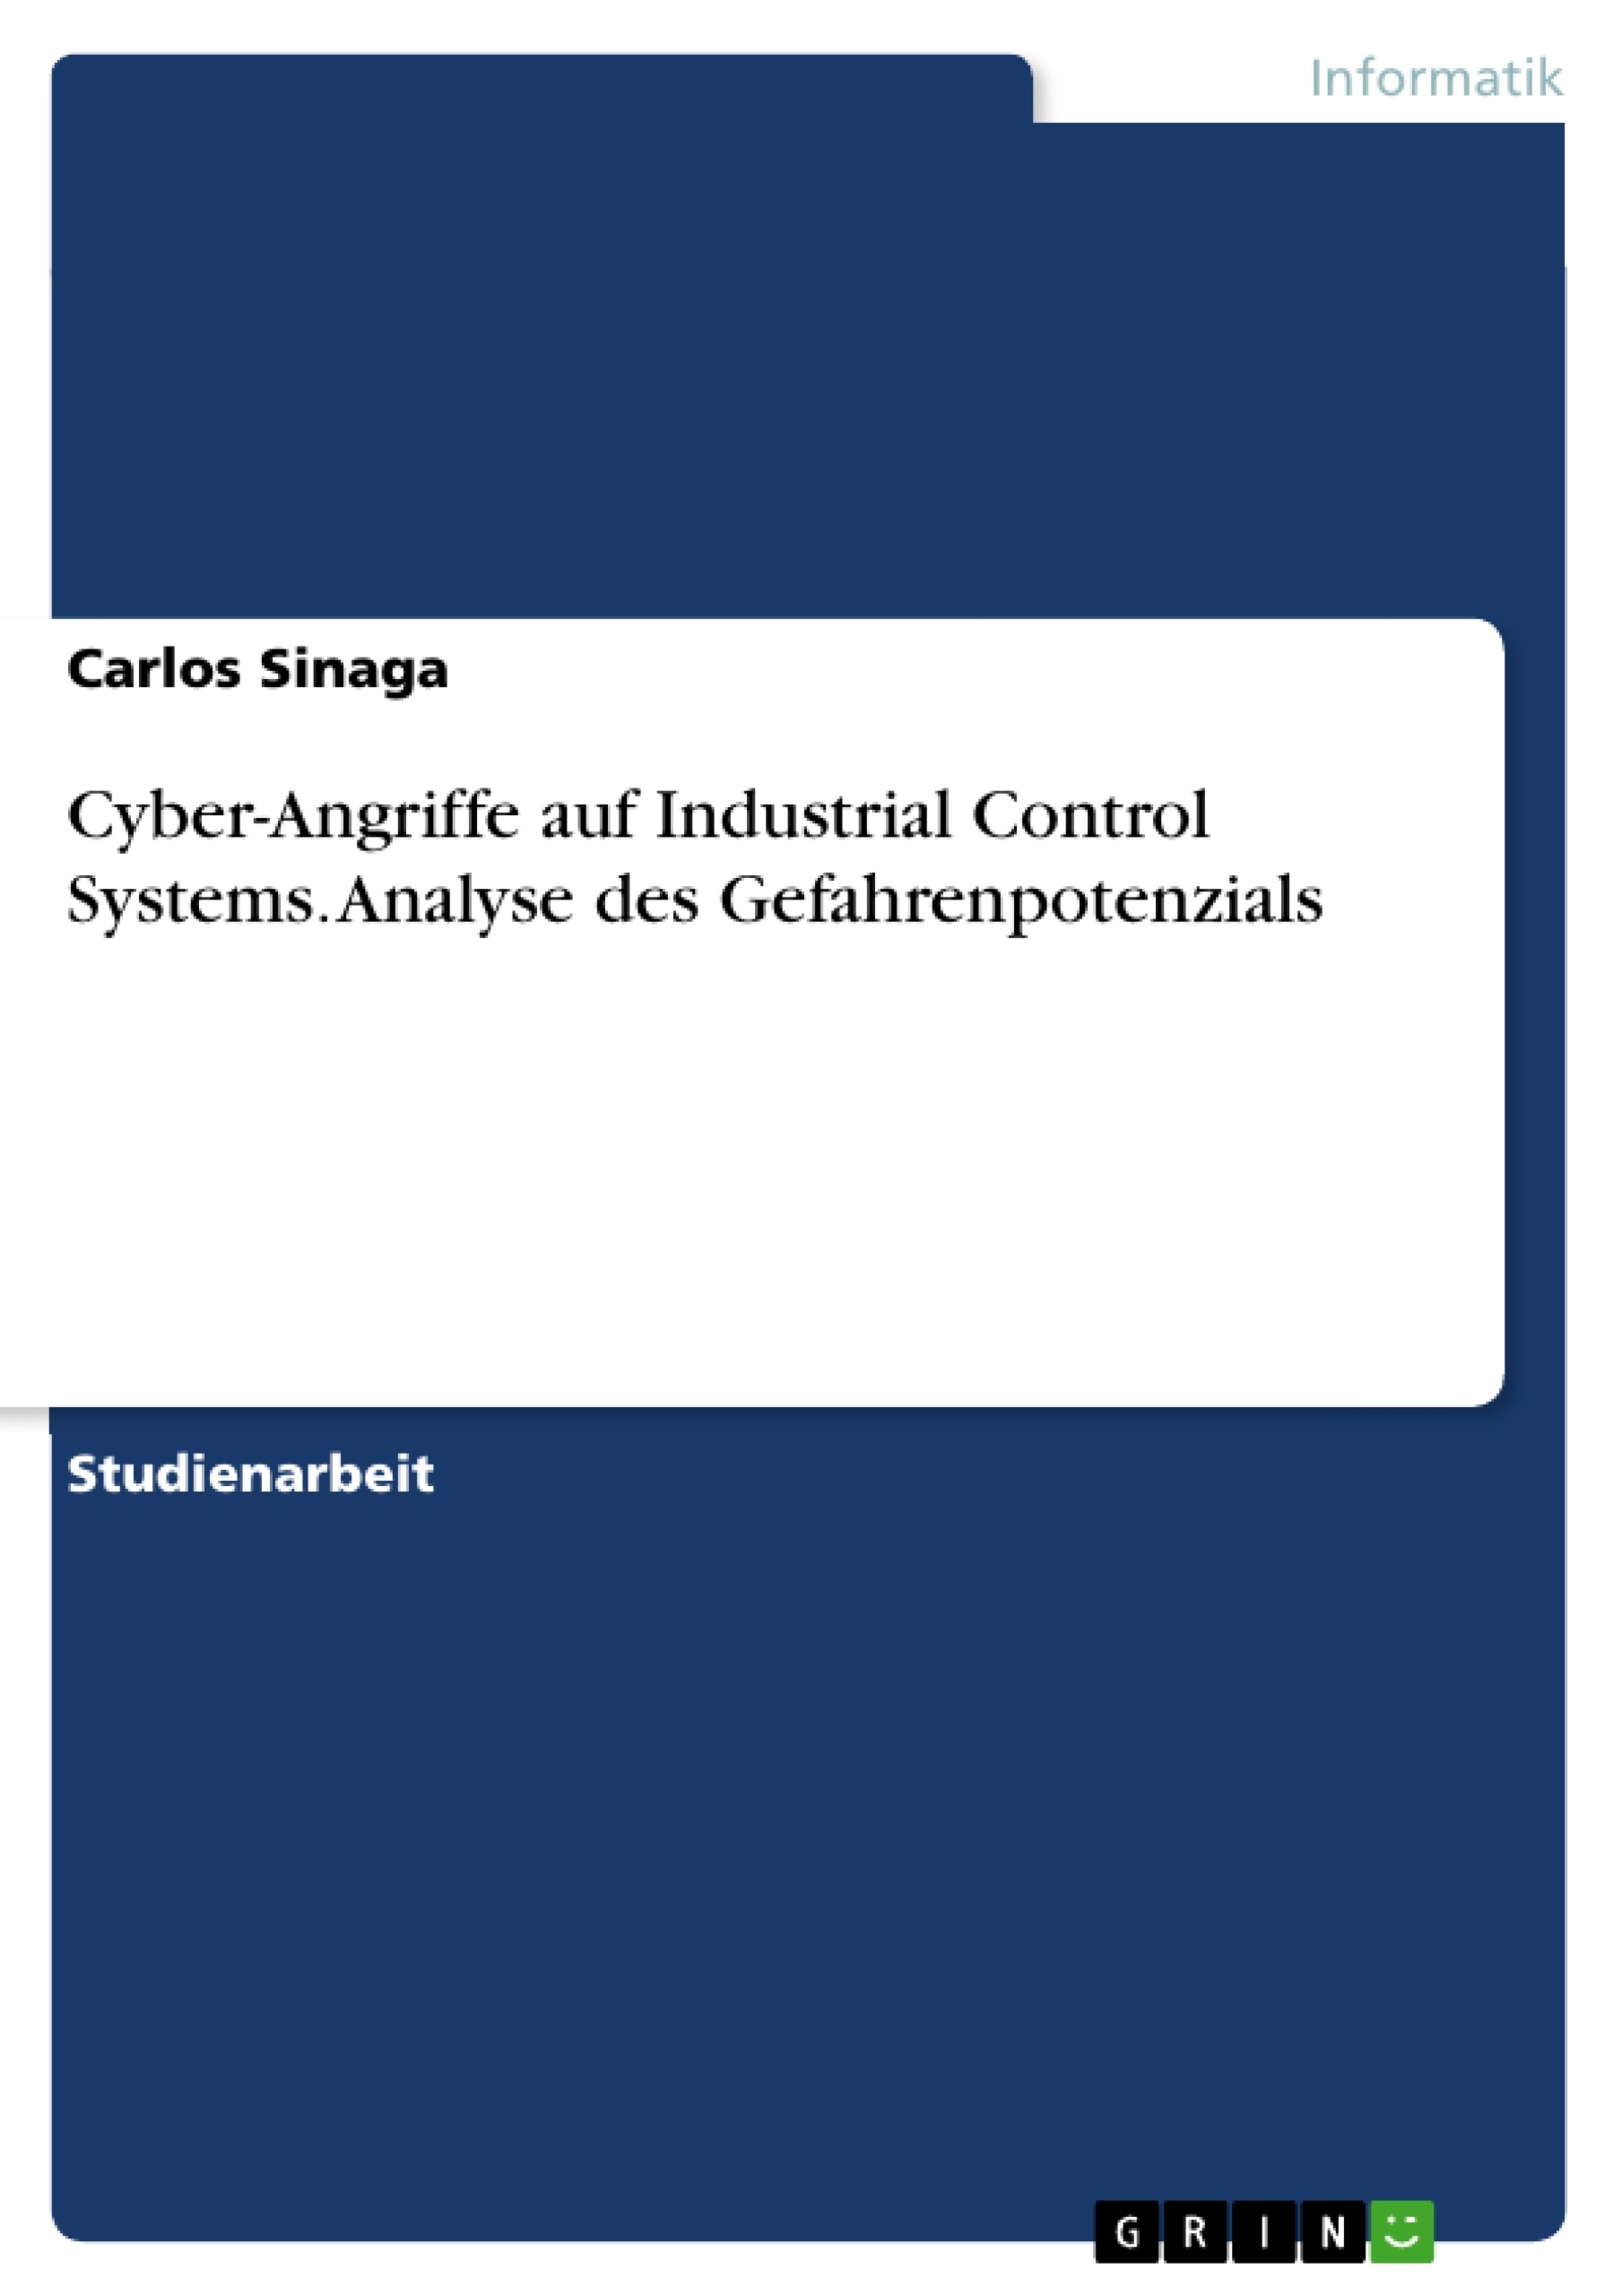 Título: Cyber-Angriffe auf Industrial Control Systems. Analyse des Gefahrenpotenzials